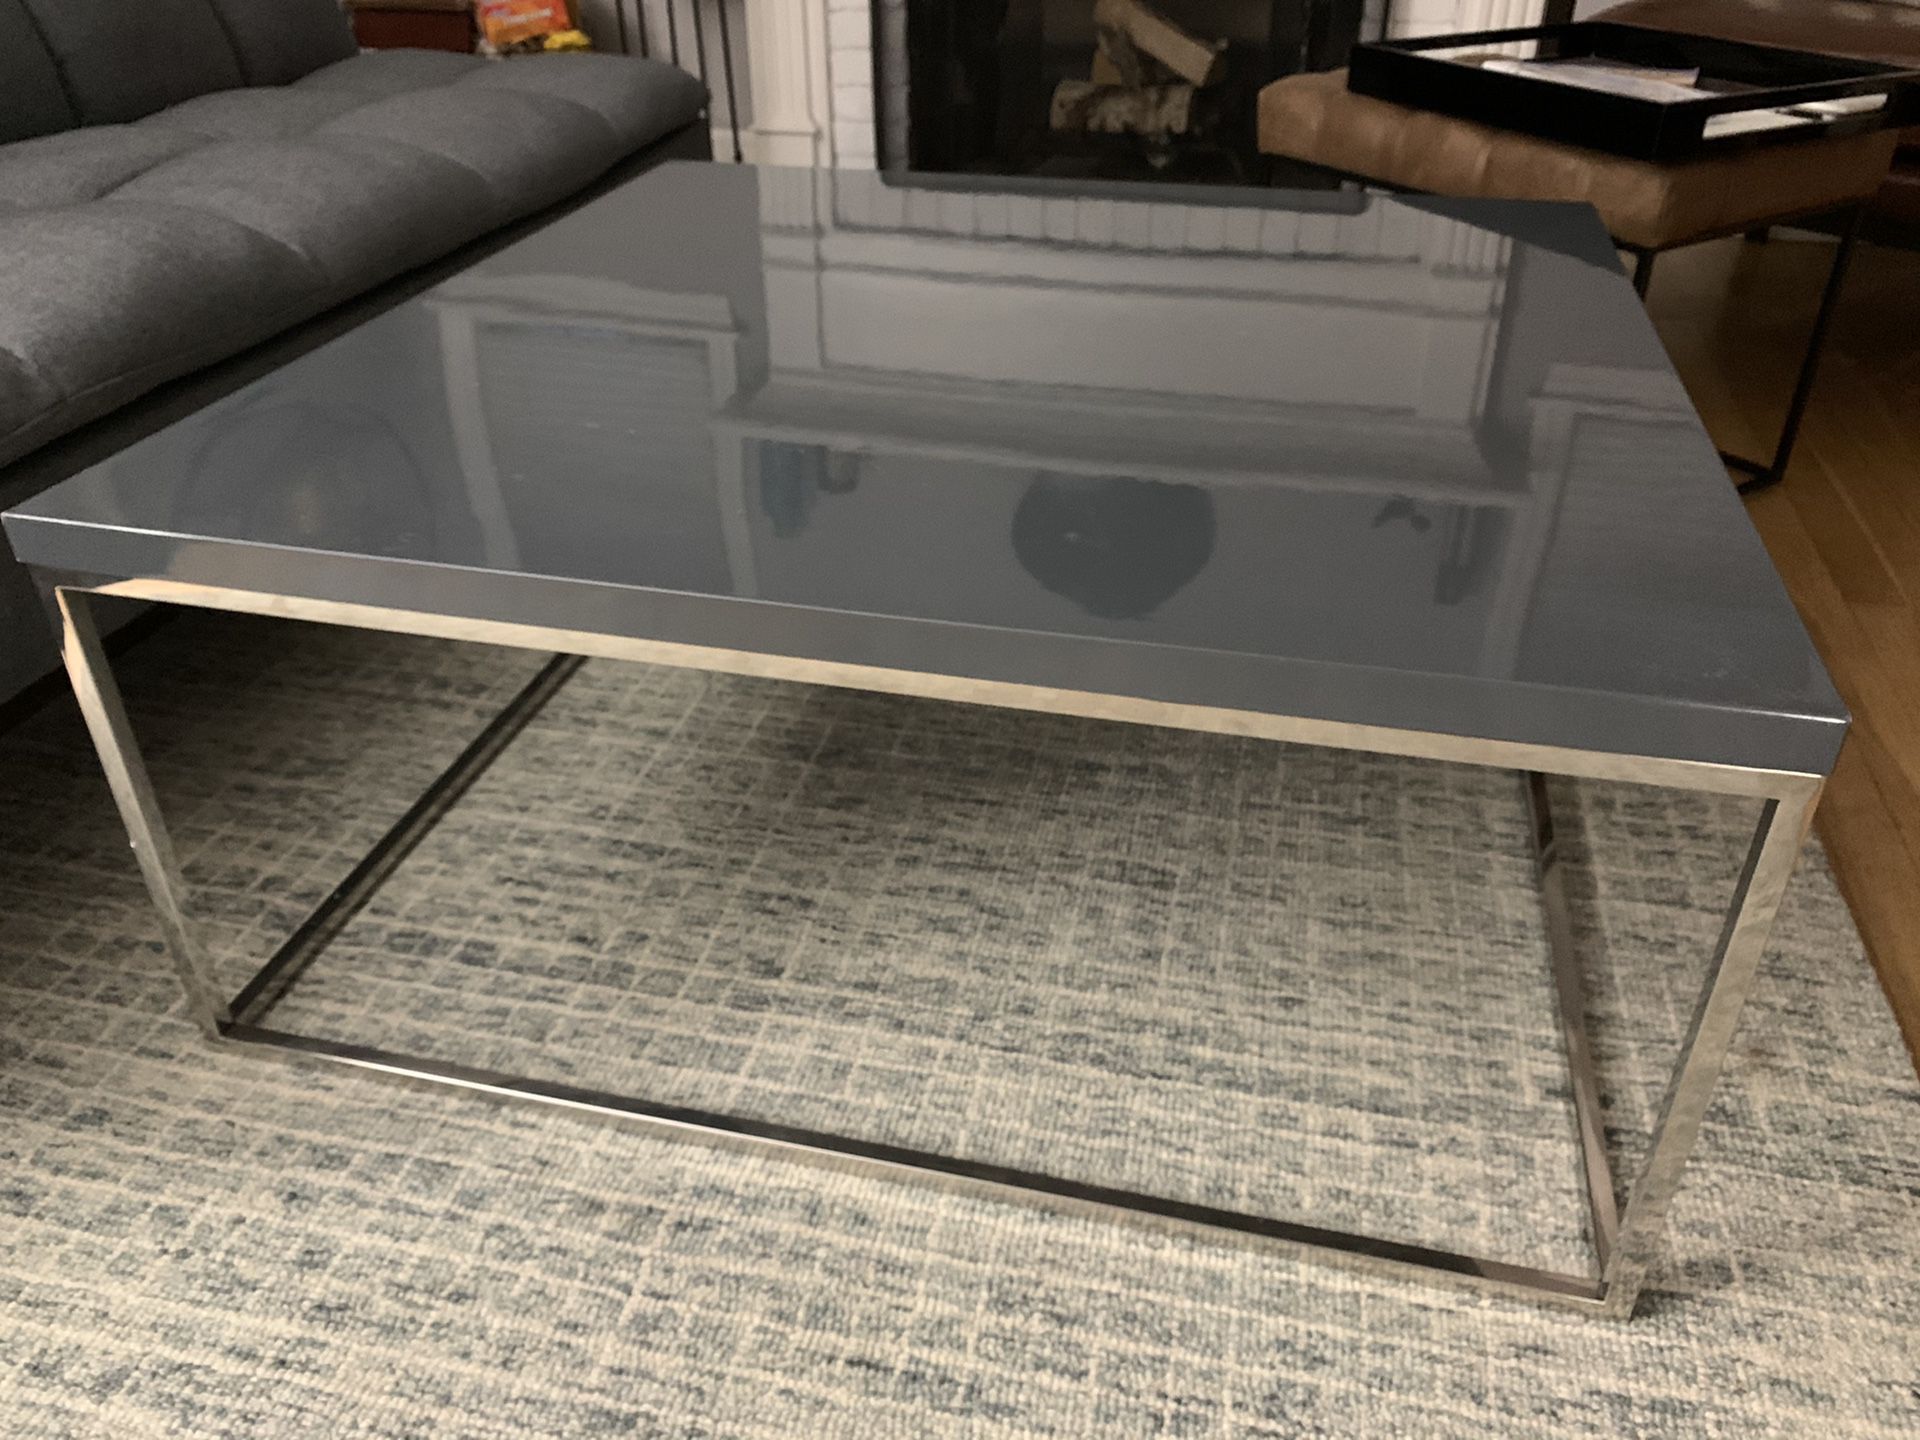 Coffee table in great condition!